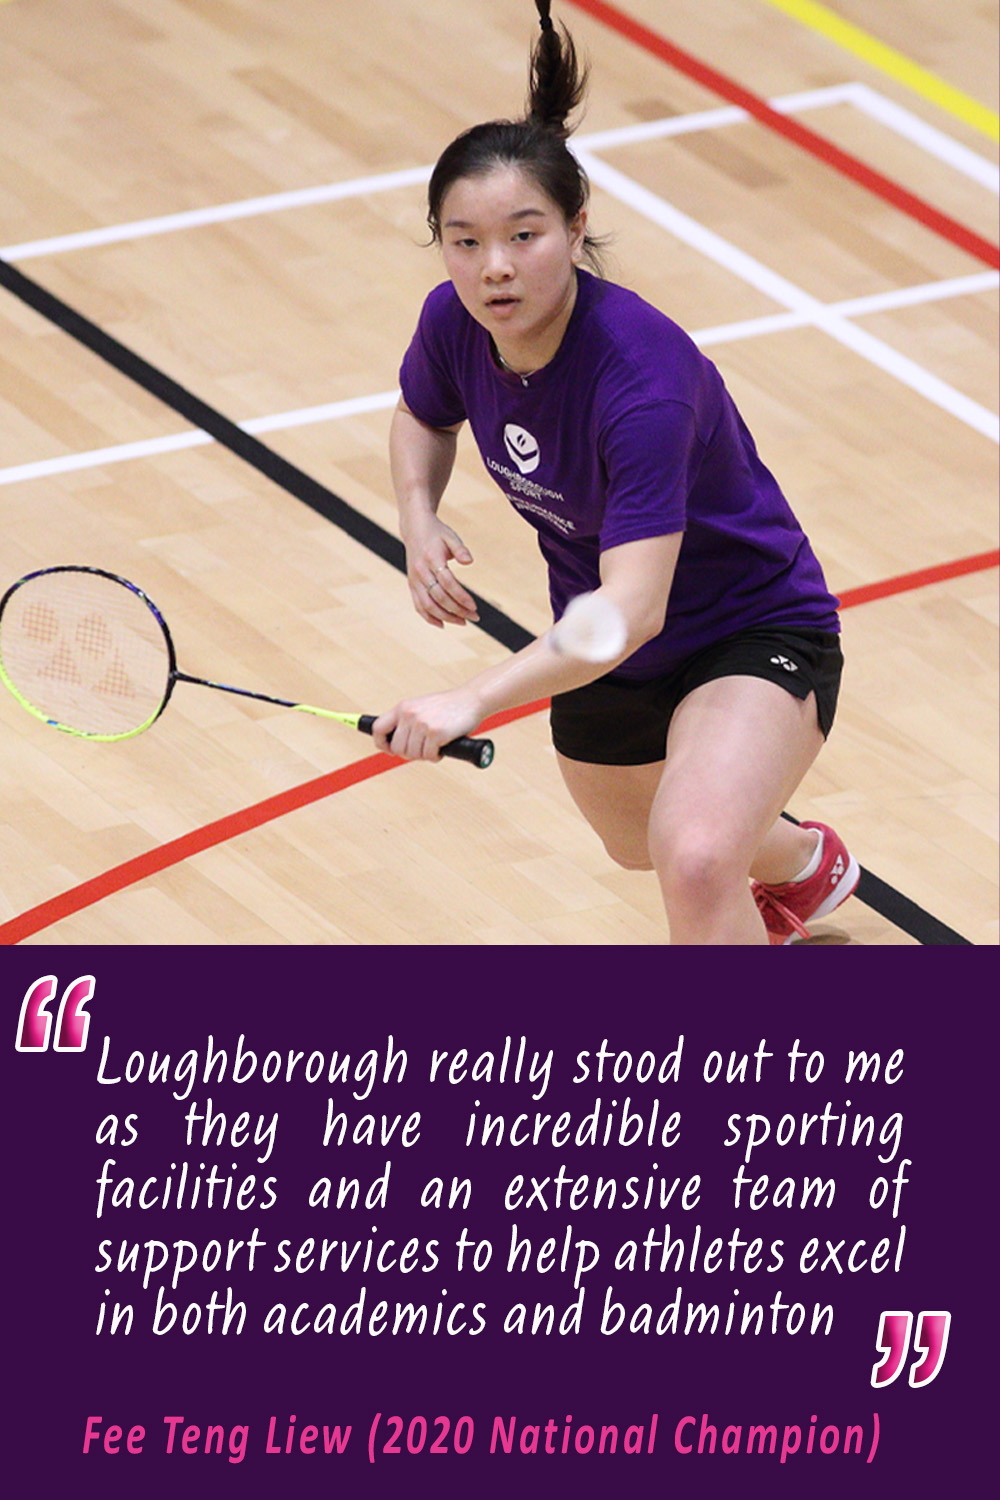 Fee Teng Liew and text: “Loughborough really stood out to me as they have incredible sporting facilities and an extensive team of support services to help athletes excel in both academics and badminton” Fee Teng Liew (2020 National Champion)